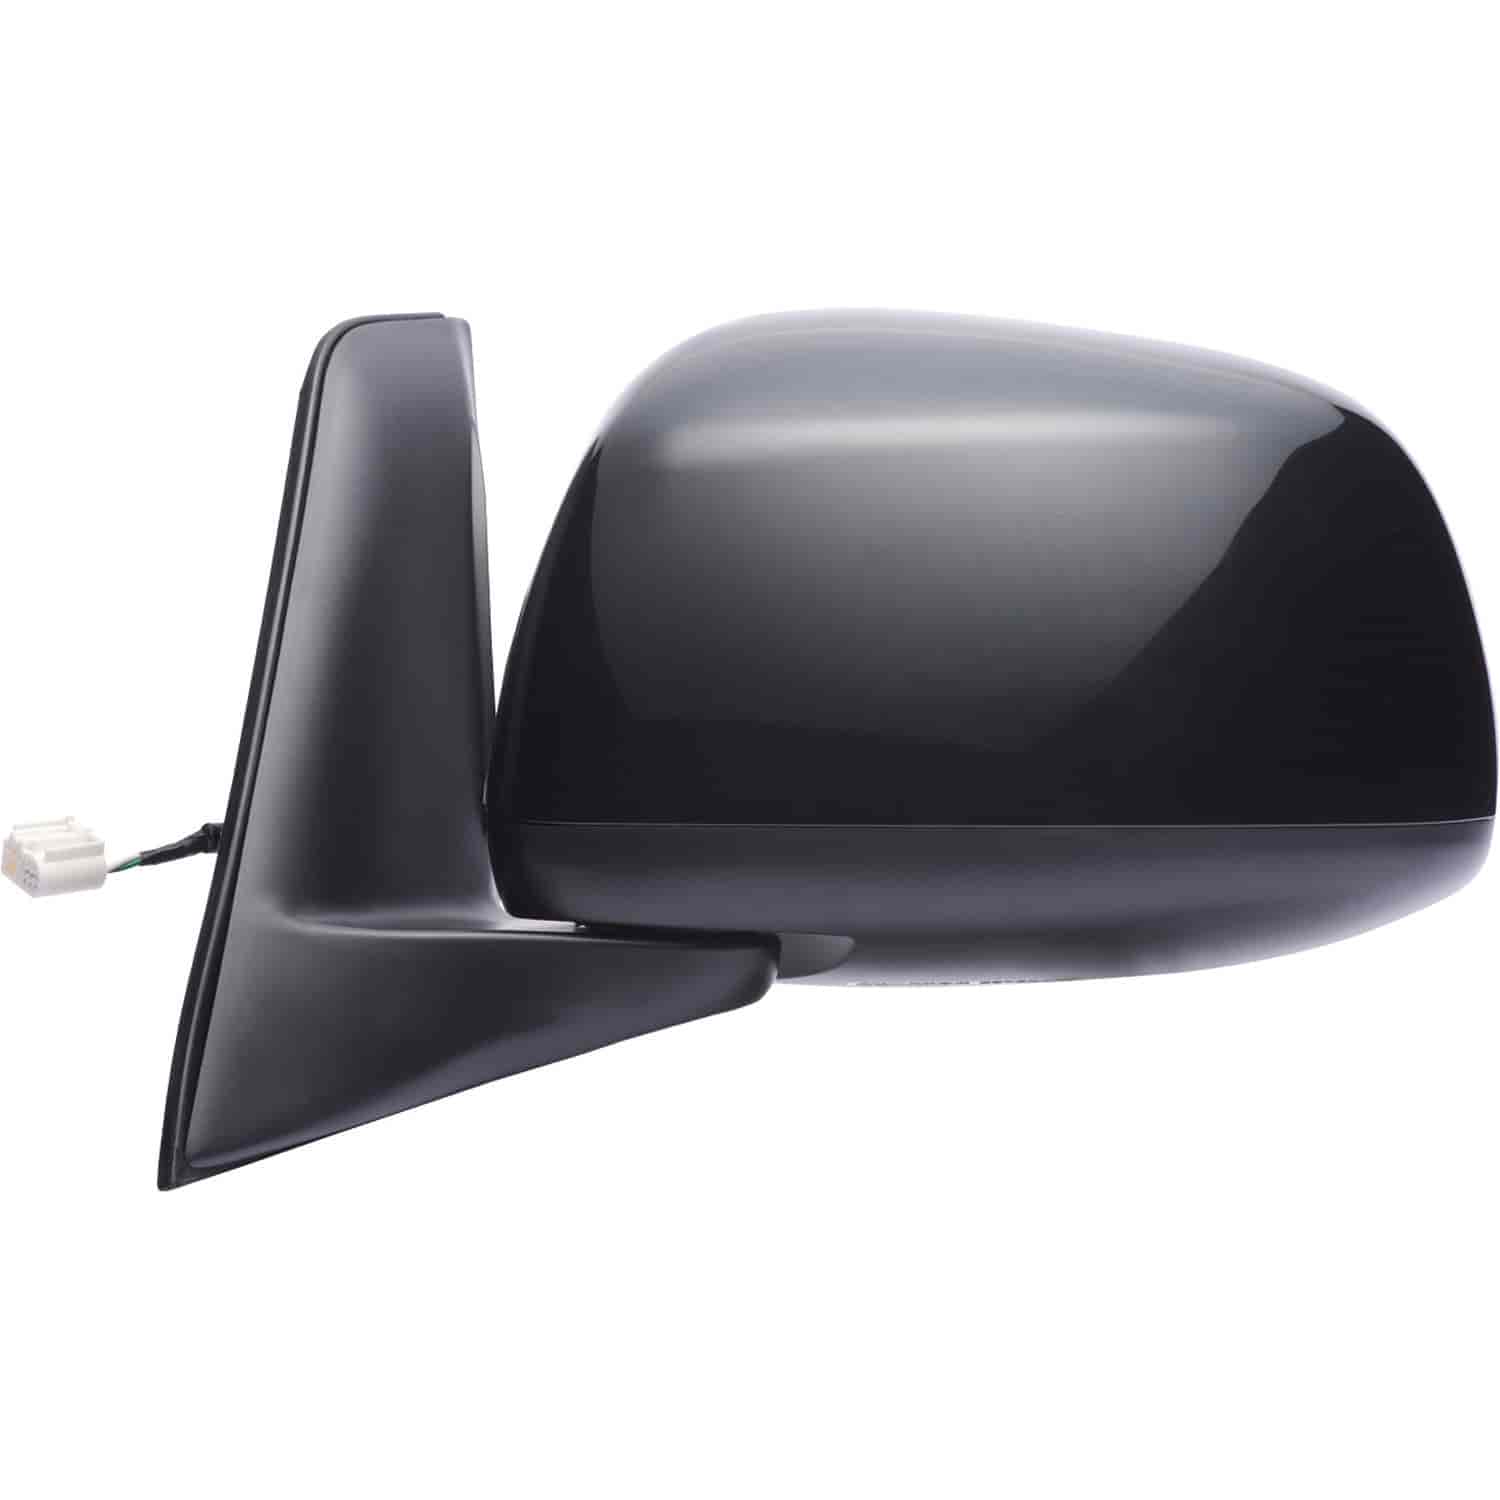 OEM Style Replacement mirror for 07-13 Suzuki SX4 driver side mirror tested to fit and function like